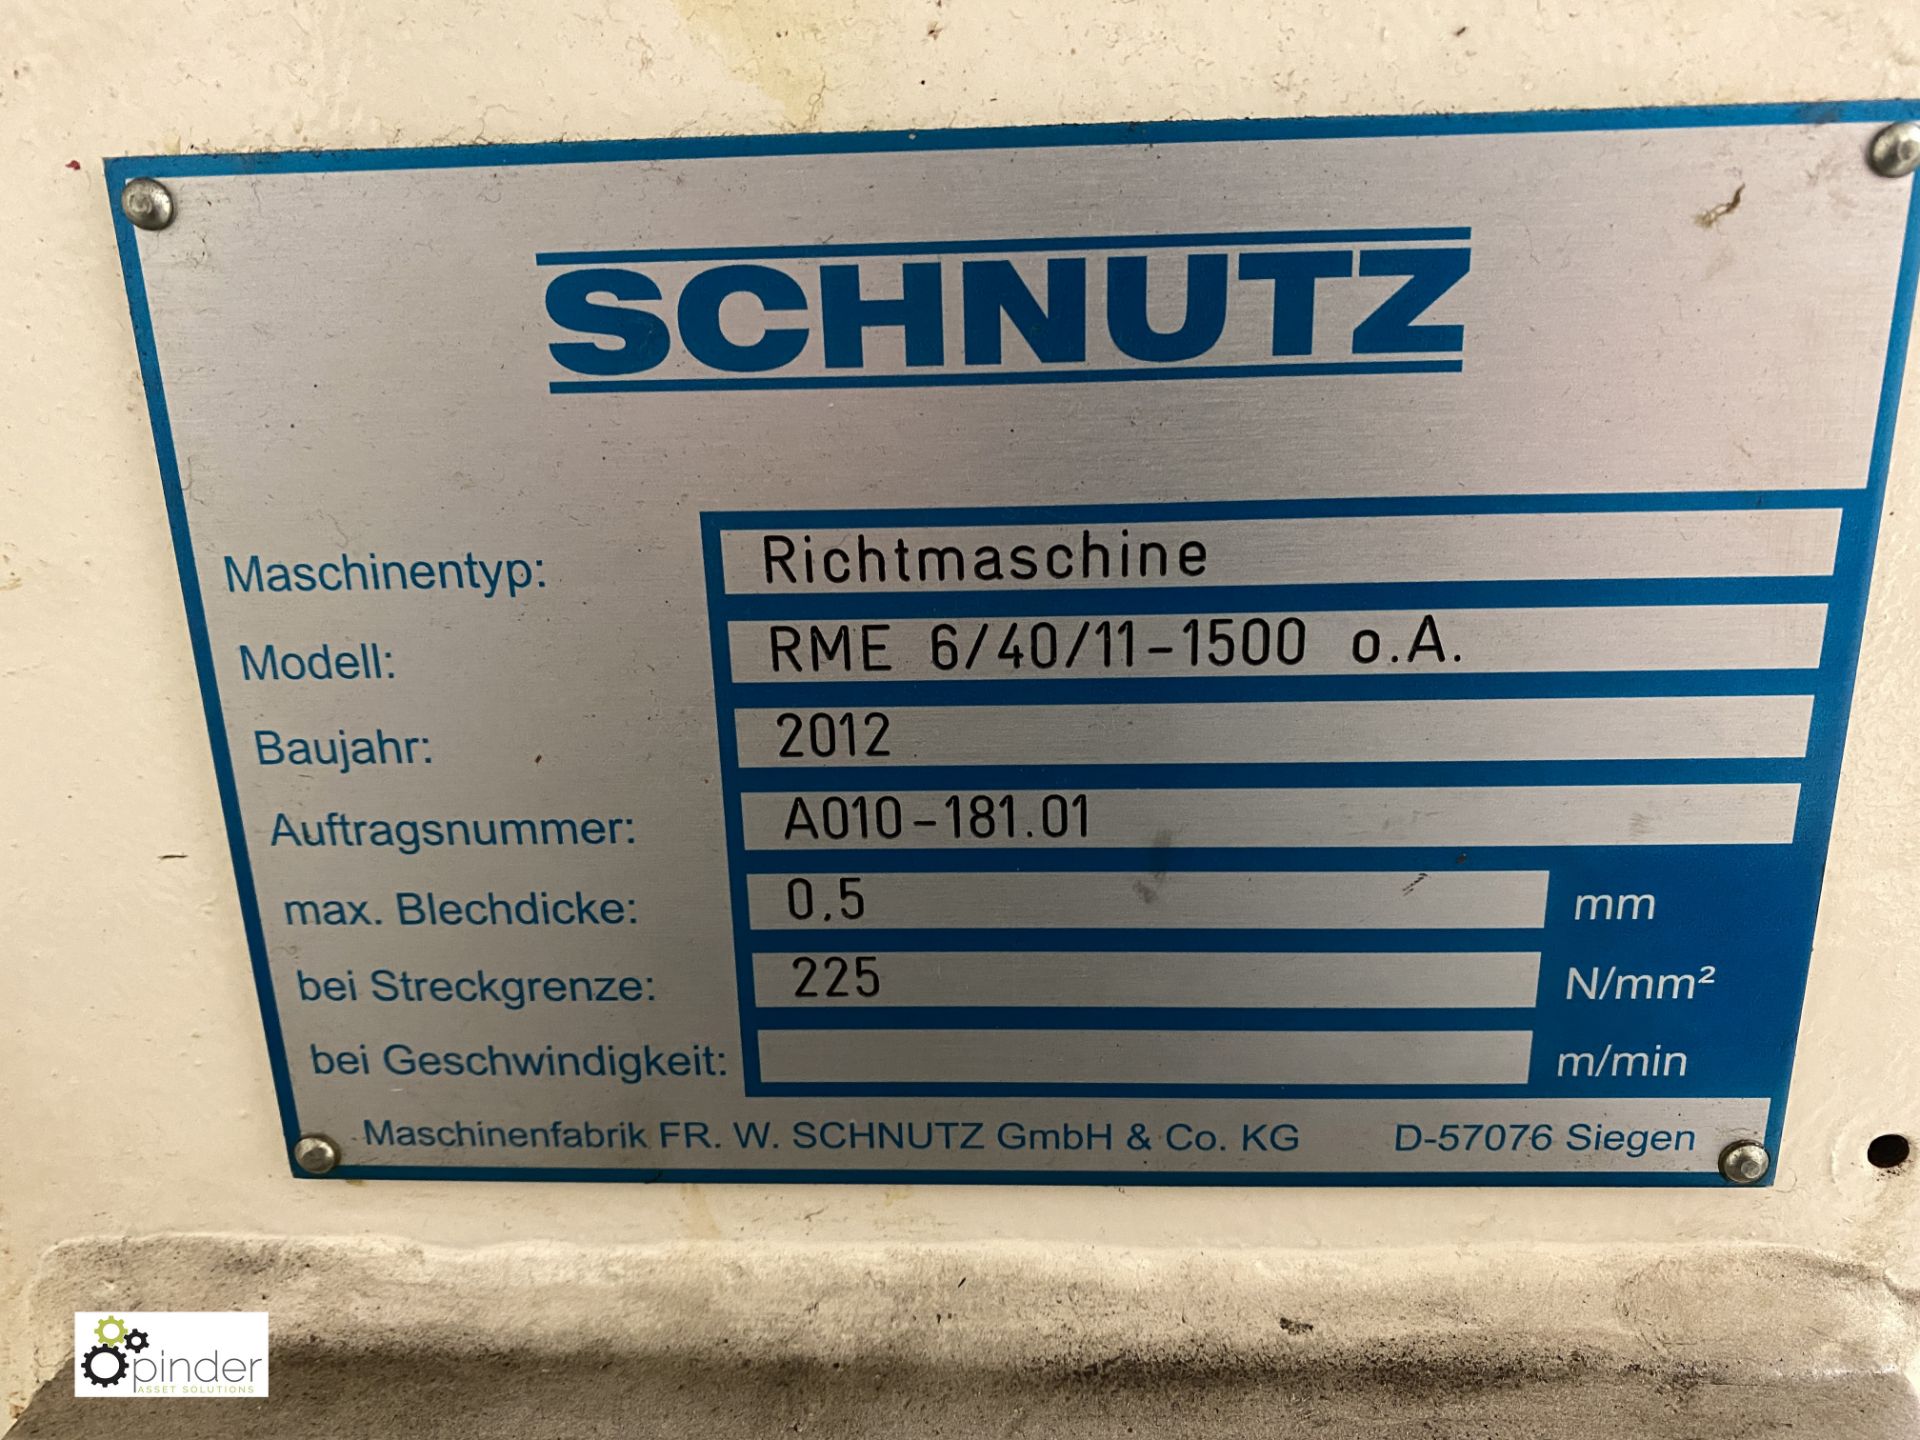 Schnutz RME 6/40/11-1500 O.A. Plate Levelling Machine, serial number A010-181.01, year 2012, 1500m - Image 5 of 20